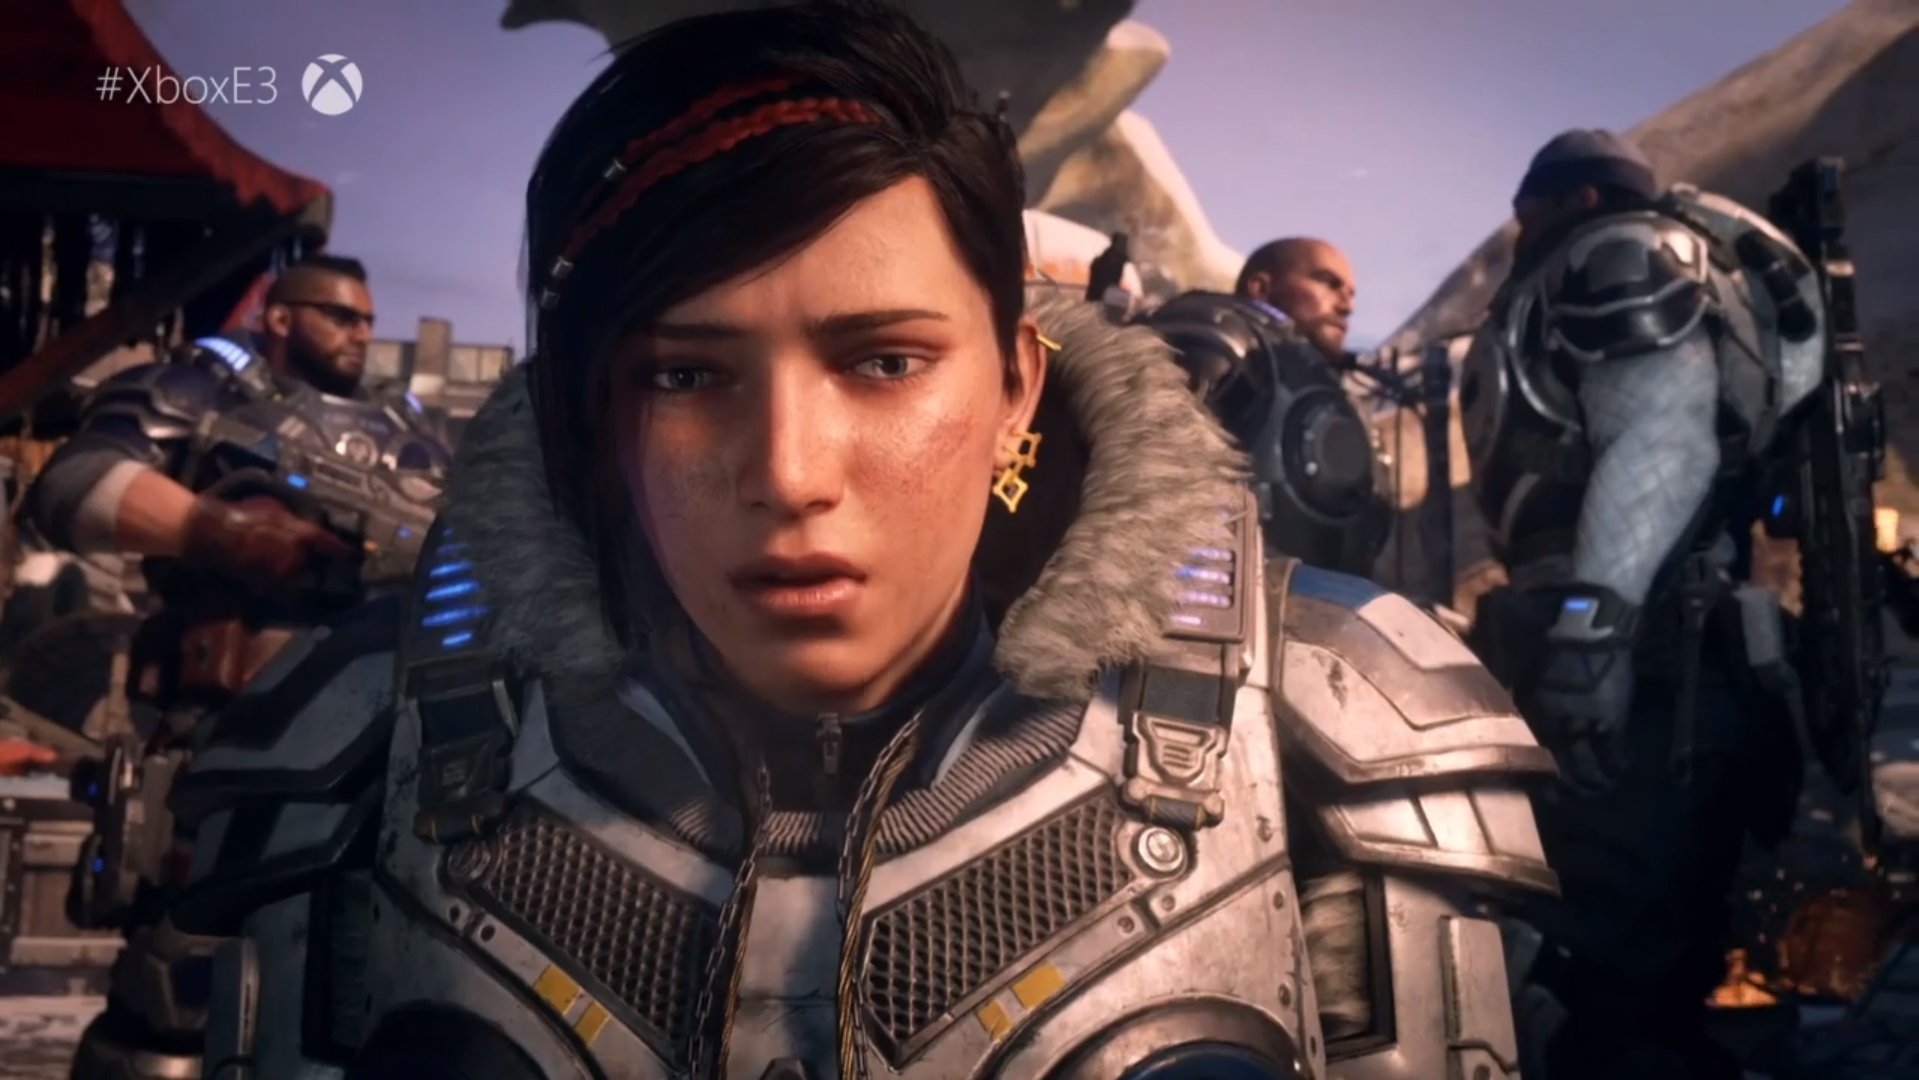 Gears 5 Review 